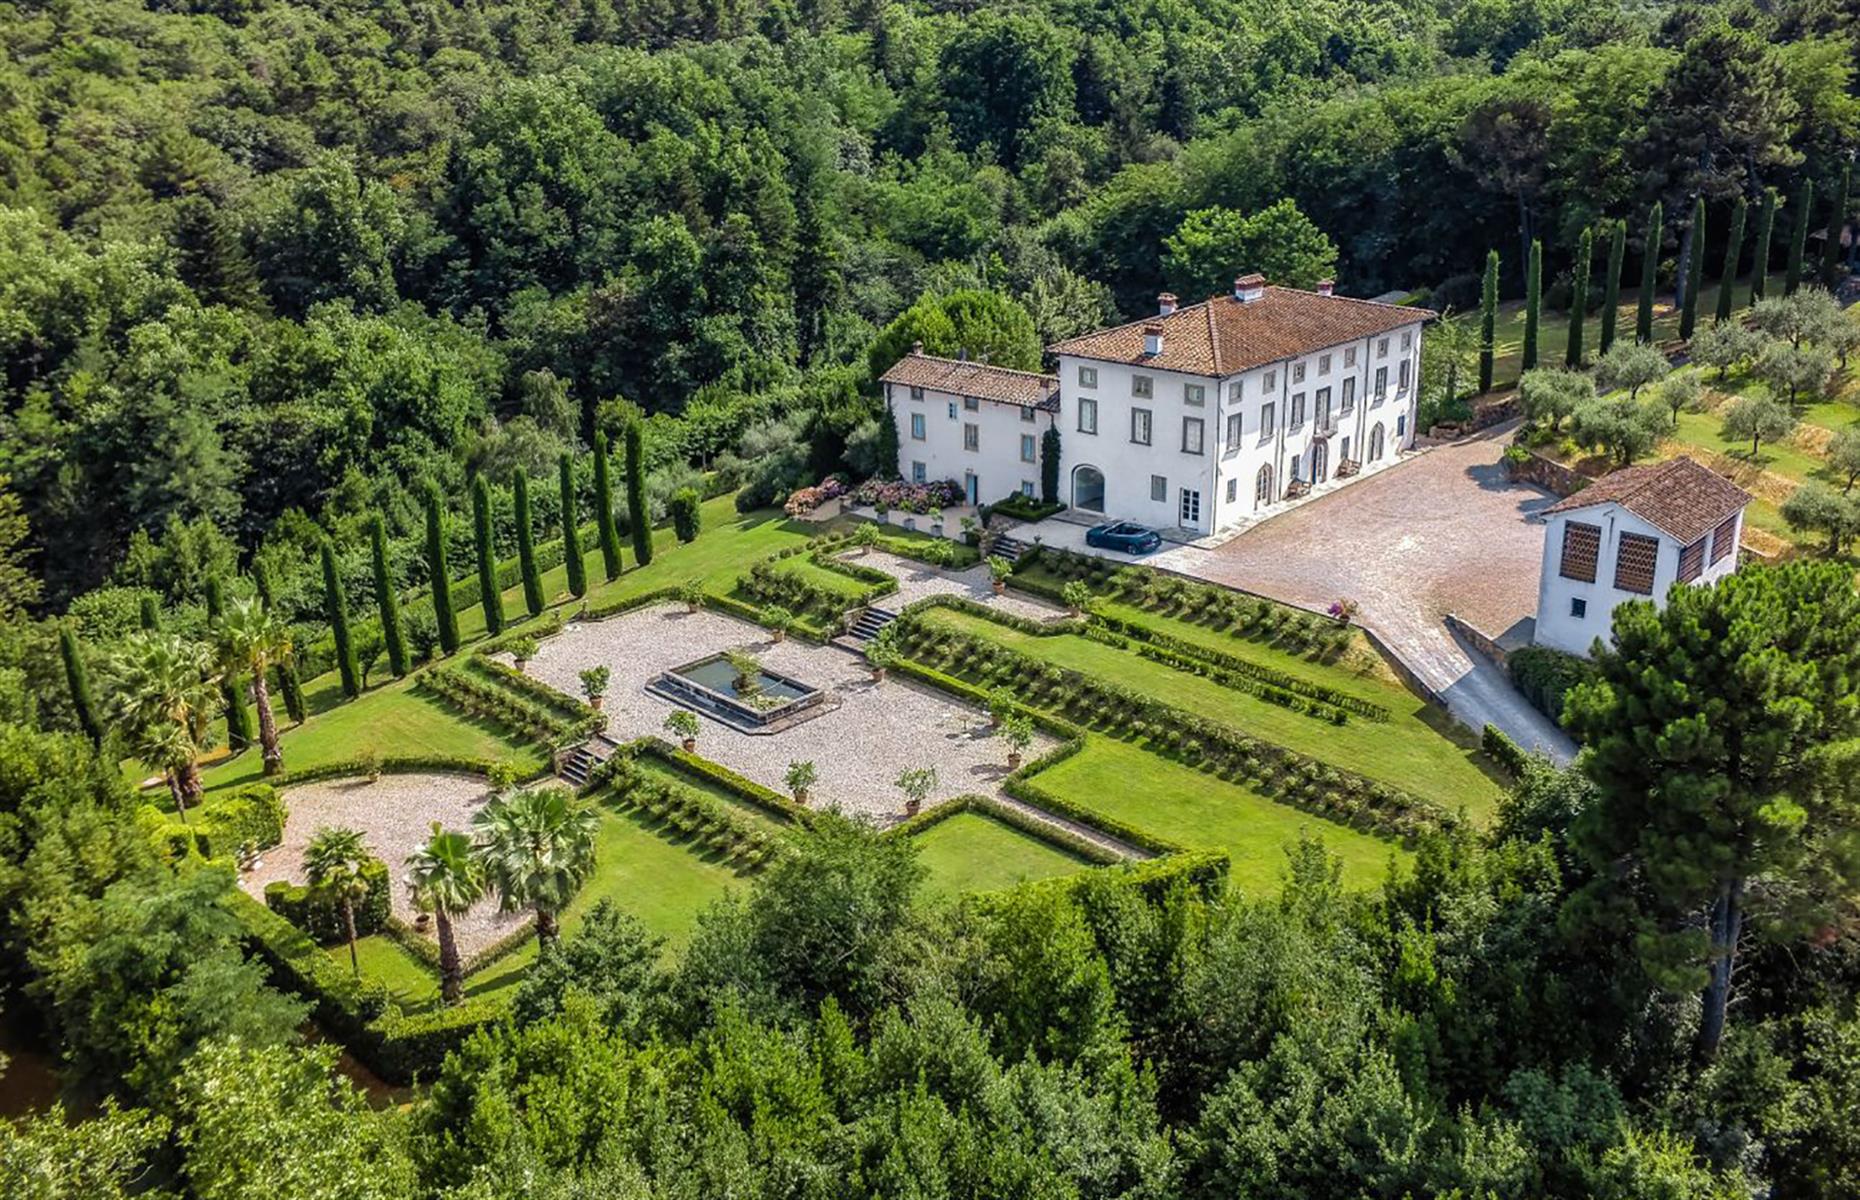 <p>Leaving <a href="https://www.airbnb.co.uk/luxury/listing/36111786">this delightful 15th-century estate</a> in Tuscany can't be easy. Set in 100 acres of woodlands, olive groves and vegetable gardens, the restored farmhouse is surrounded by palm trees, lush lawns and a terraced garden. Inside, state-of-the-art mod-cons sit comfortably with historic details.</p>